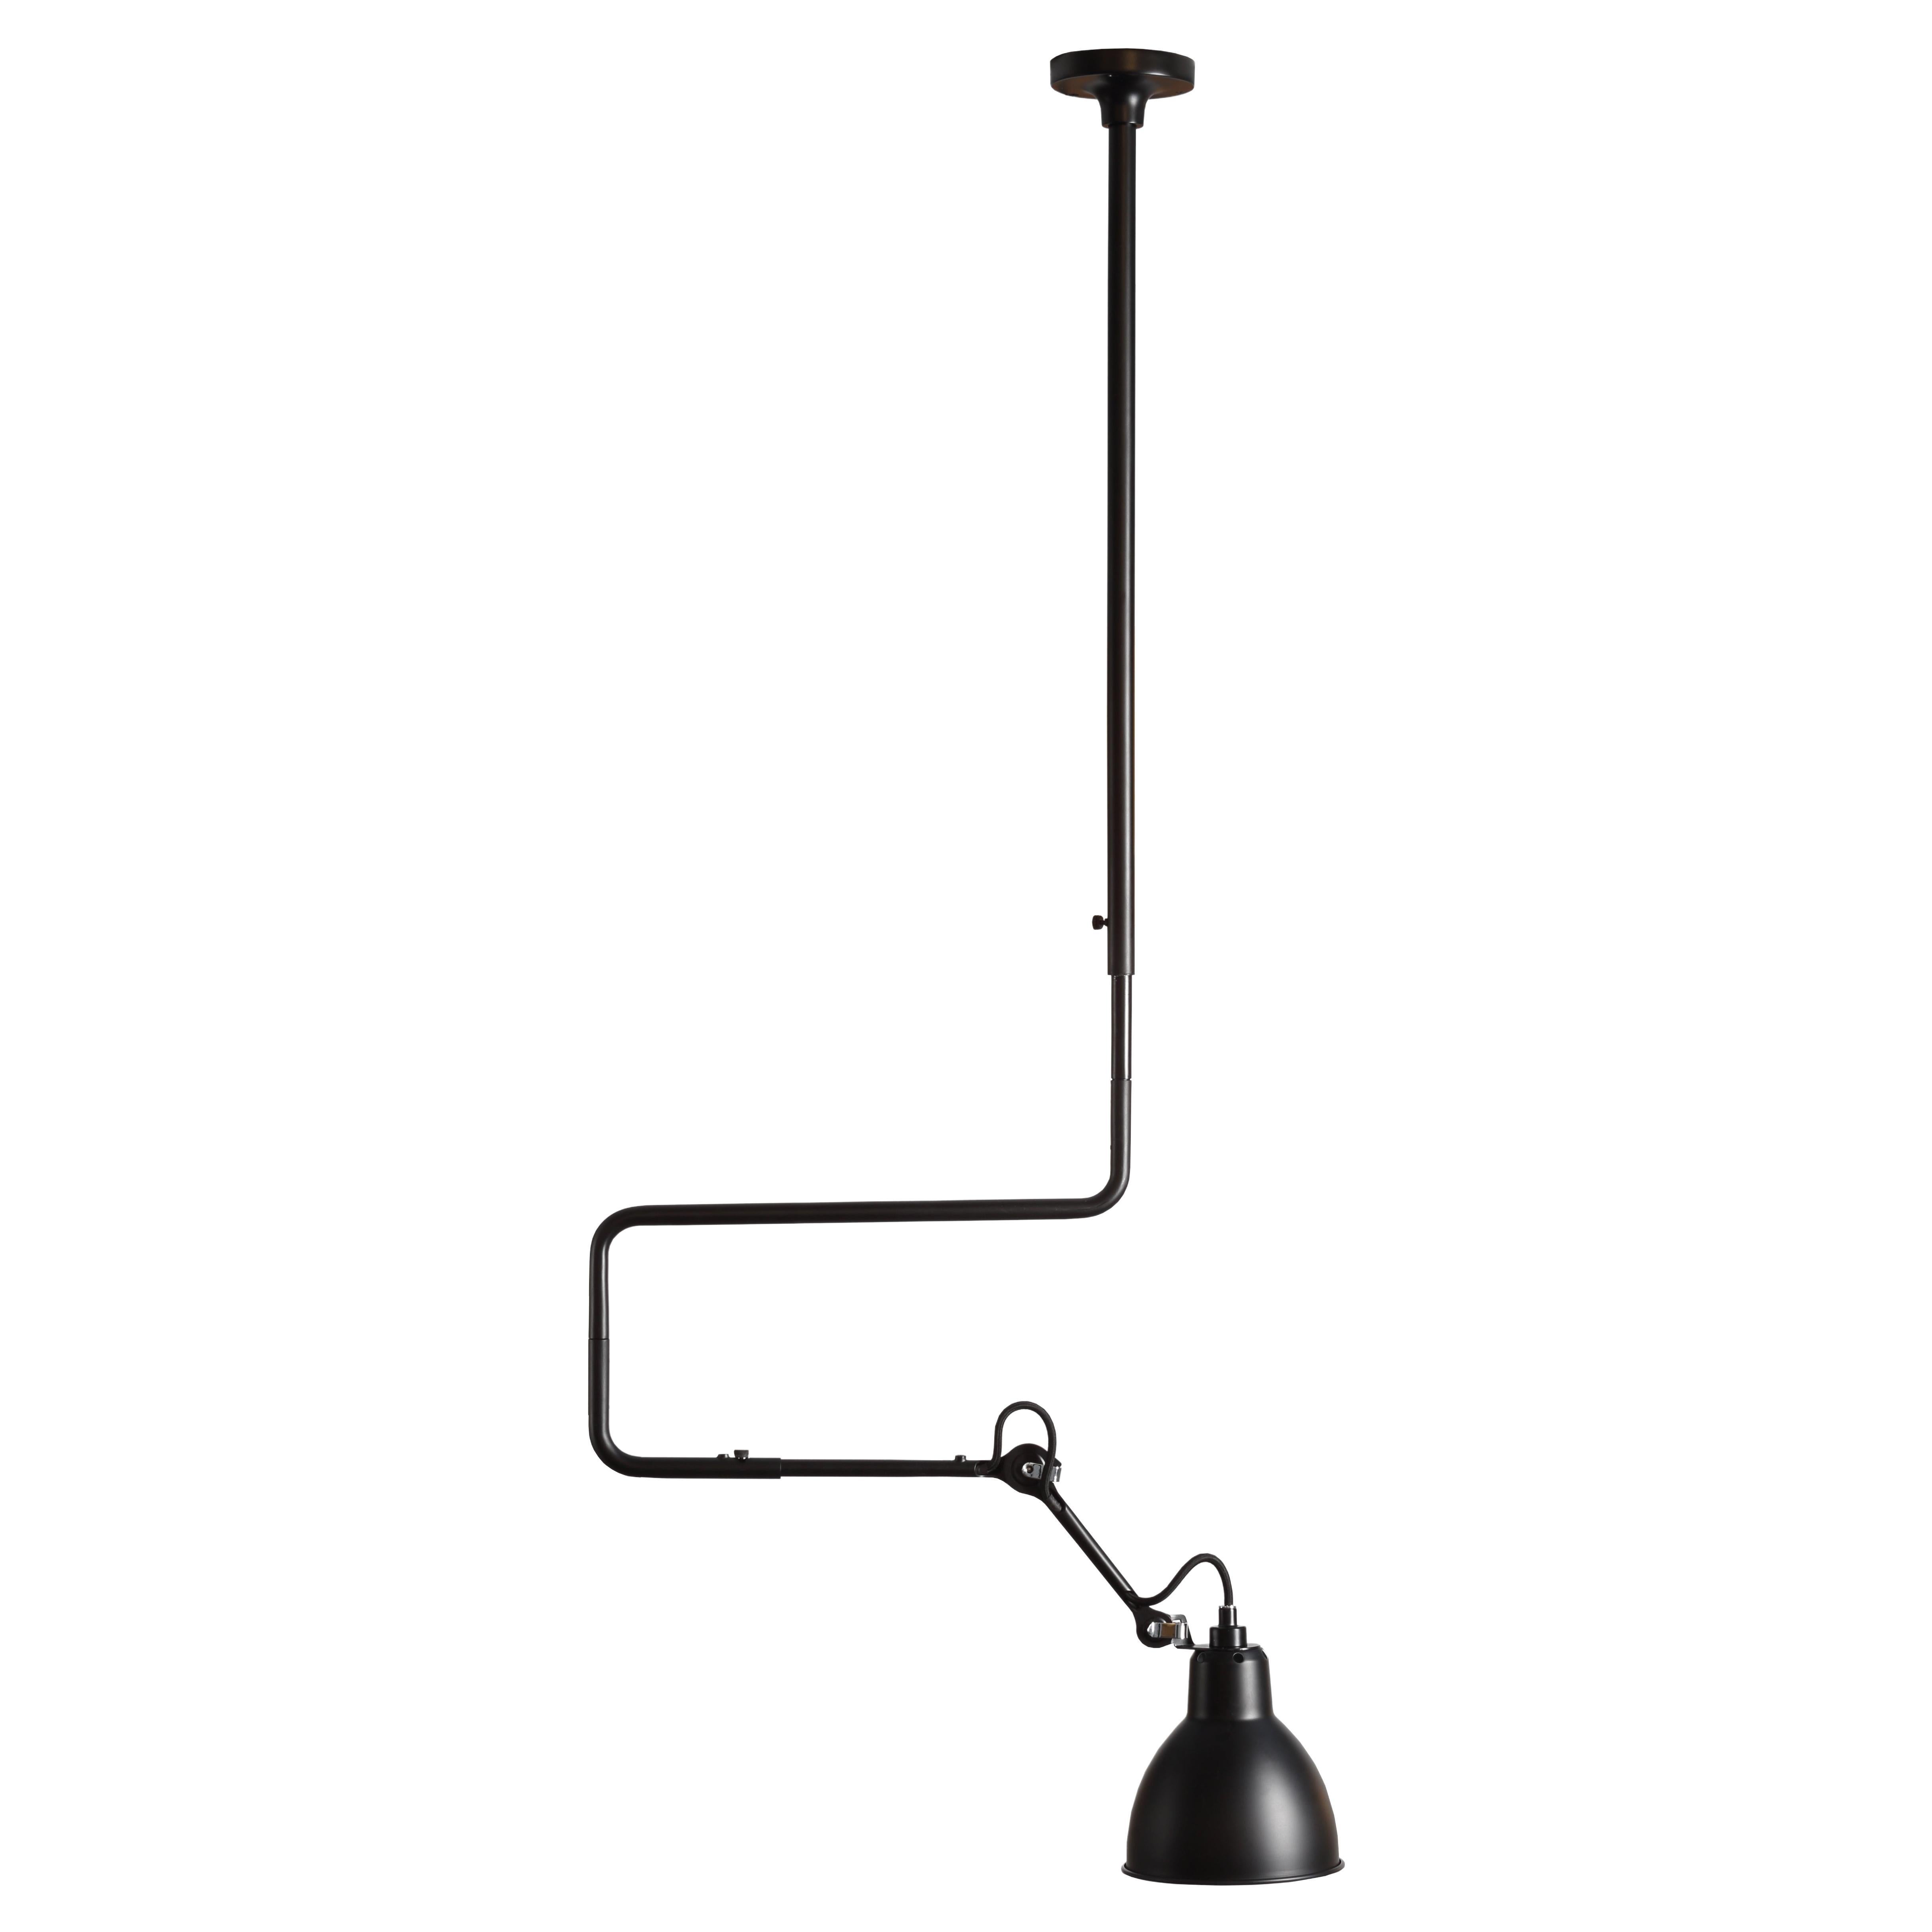 DCW Editions La Lampe Gras N°312 L Pendant Lamp in Black Arm and Black Shade